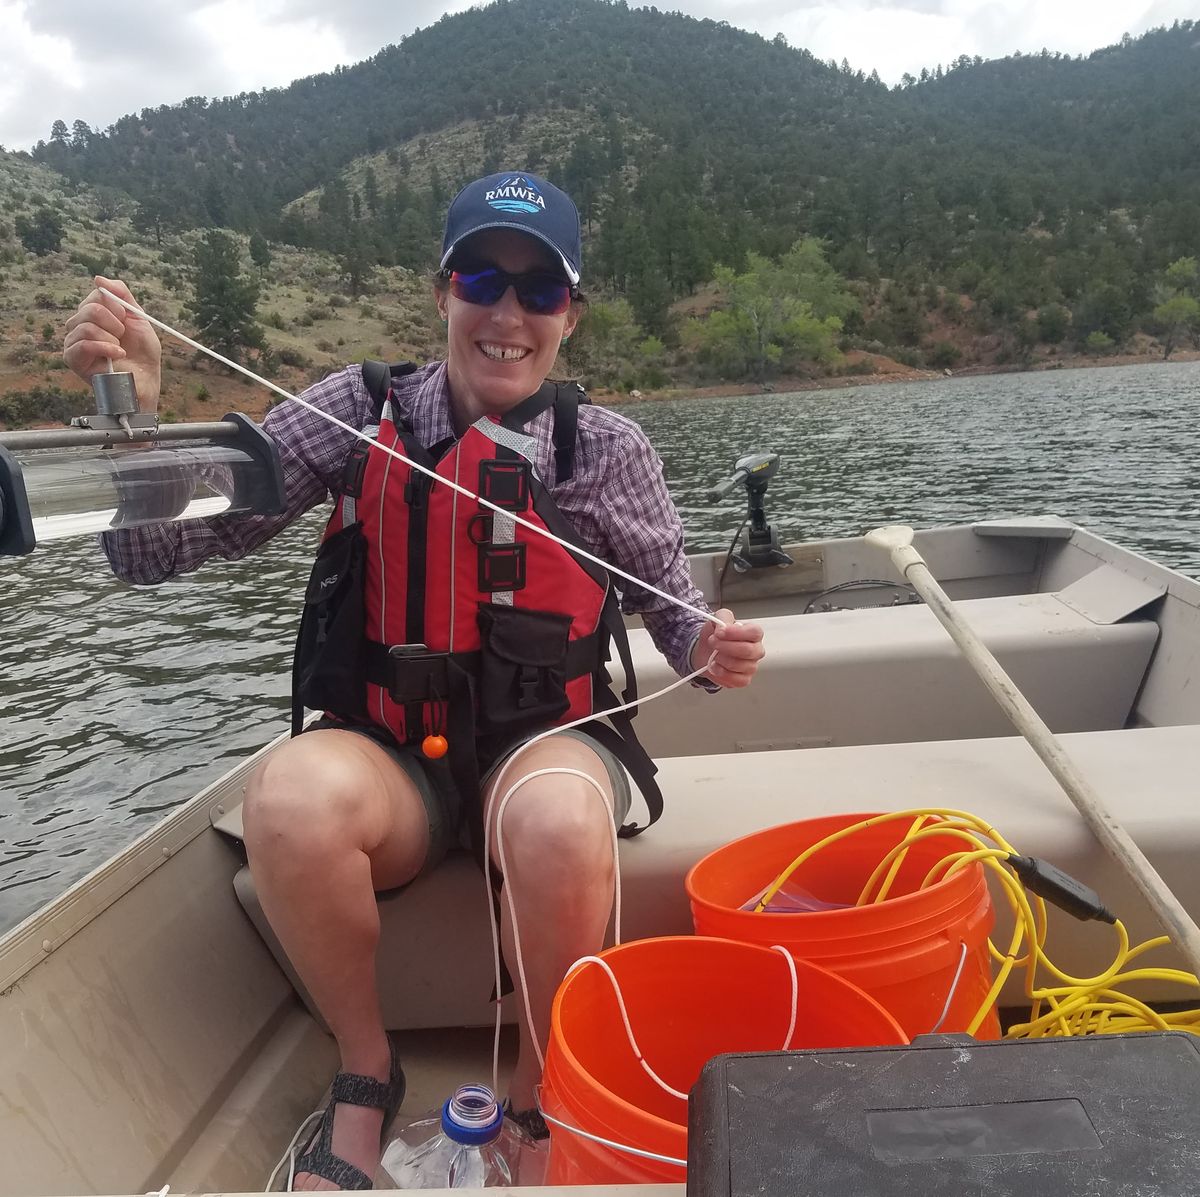 Lifejacket, Lifejacket, Boating, Boats and boating--Equipment and supplies, Recreation, Vehicle, Vacation, Water transportation, Personal protective equipment, Summer, 